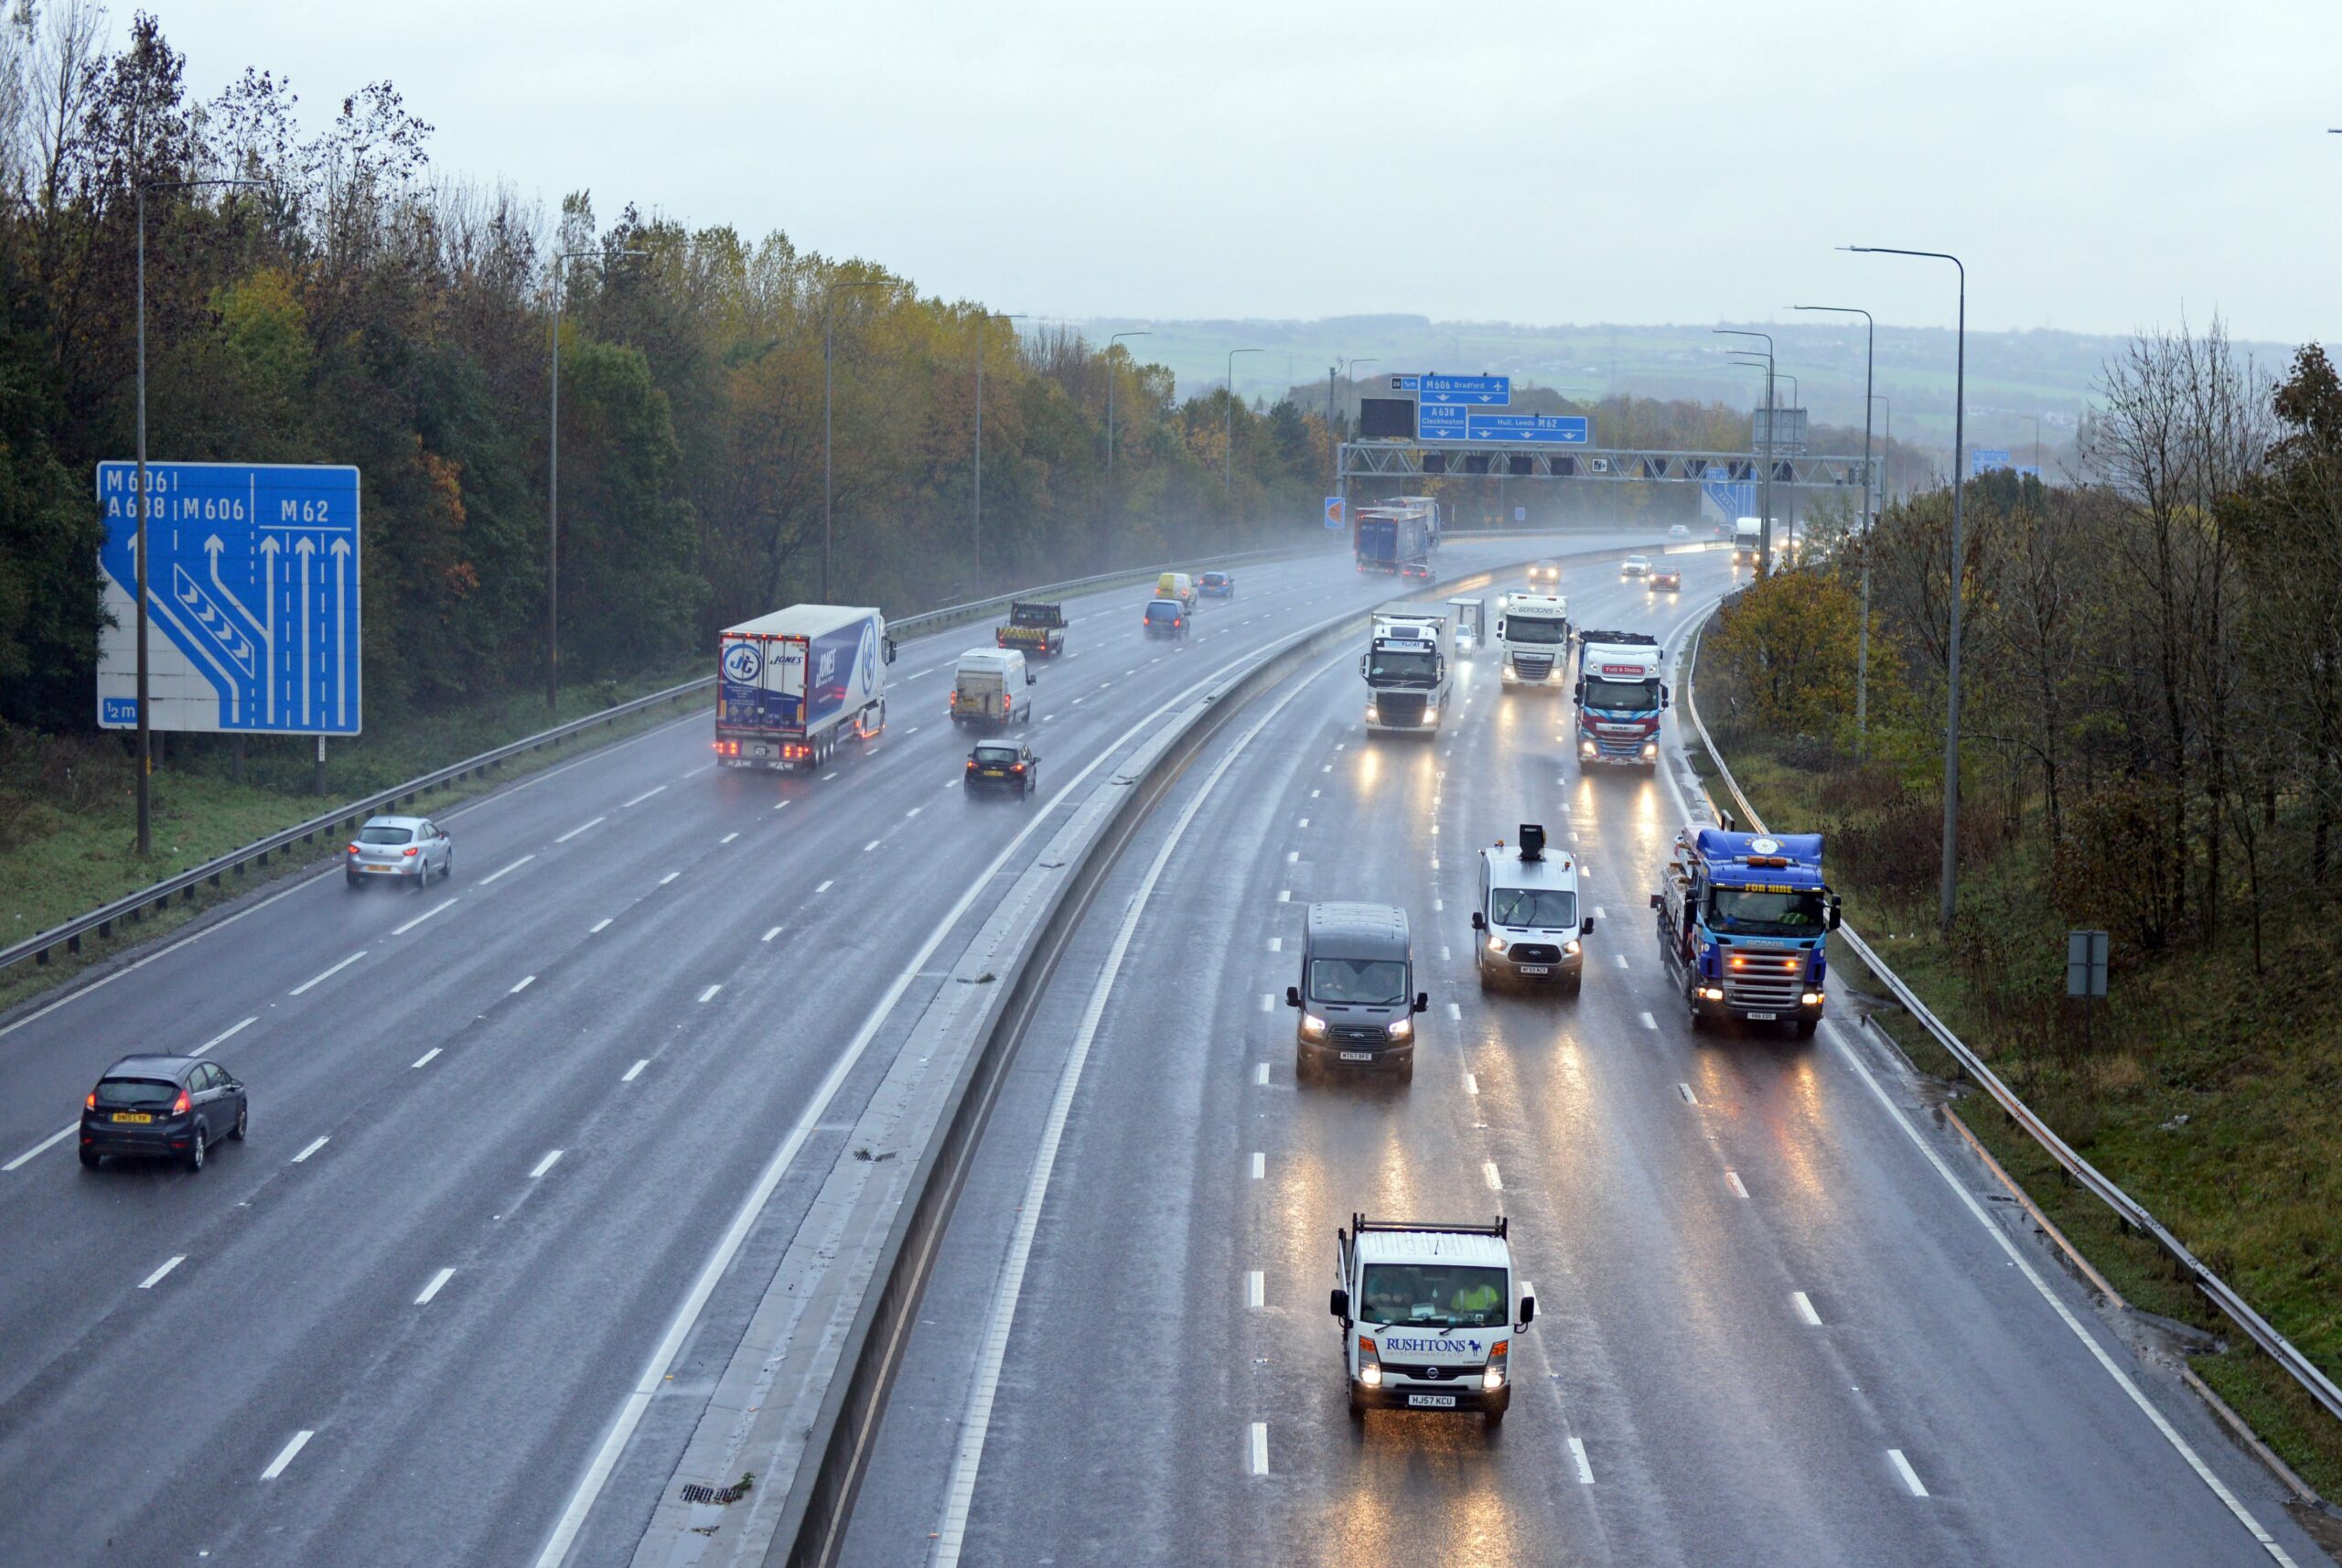 Cars and lorries driving along a motorway.